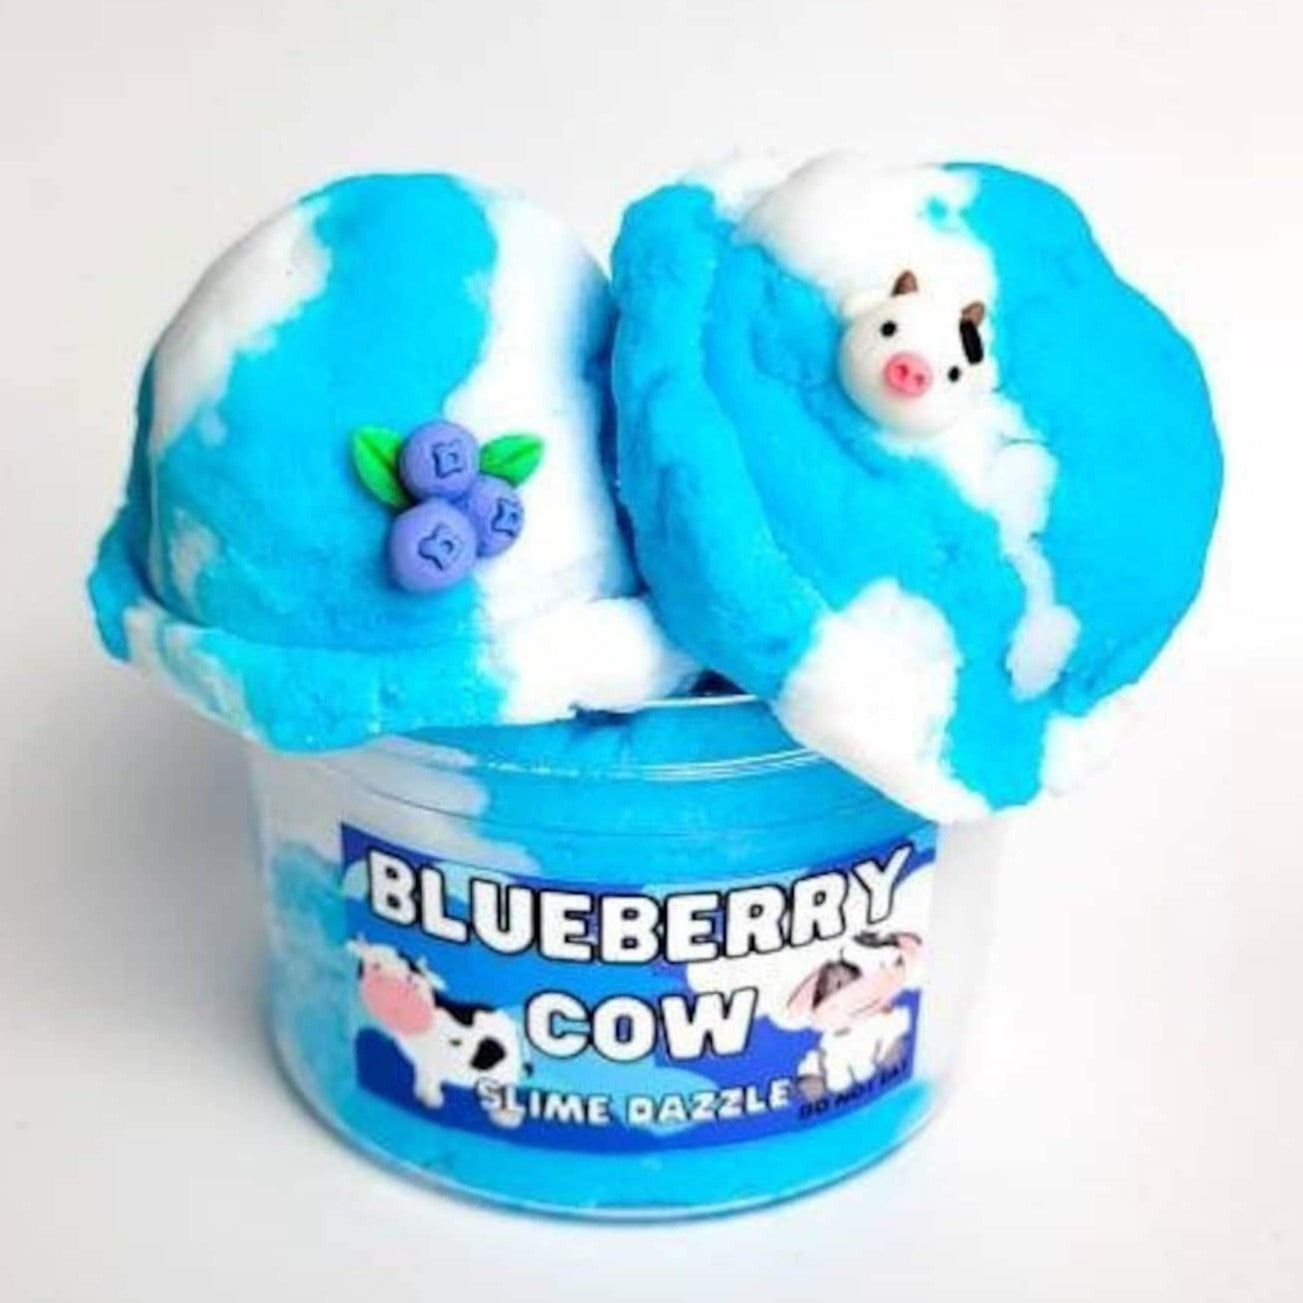 Blueberry scented cloud slime